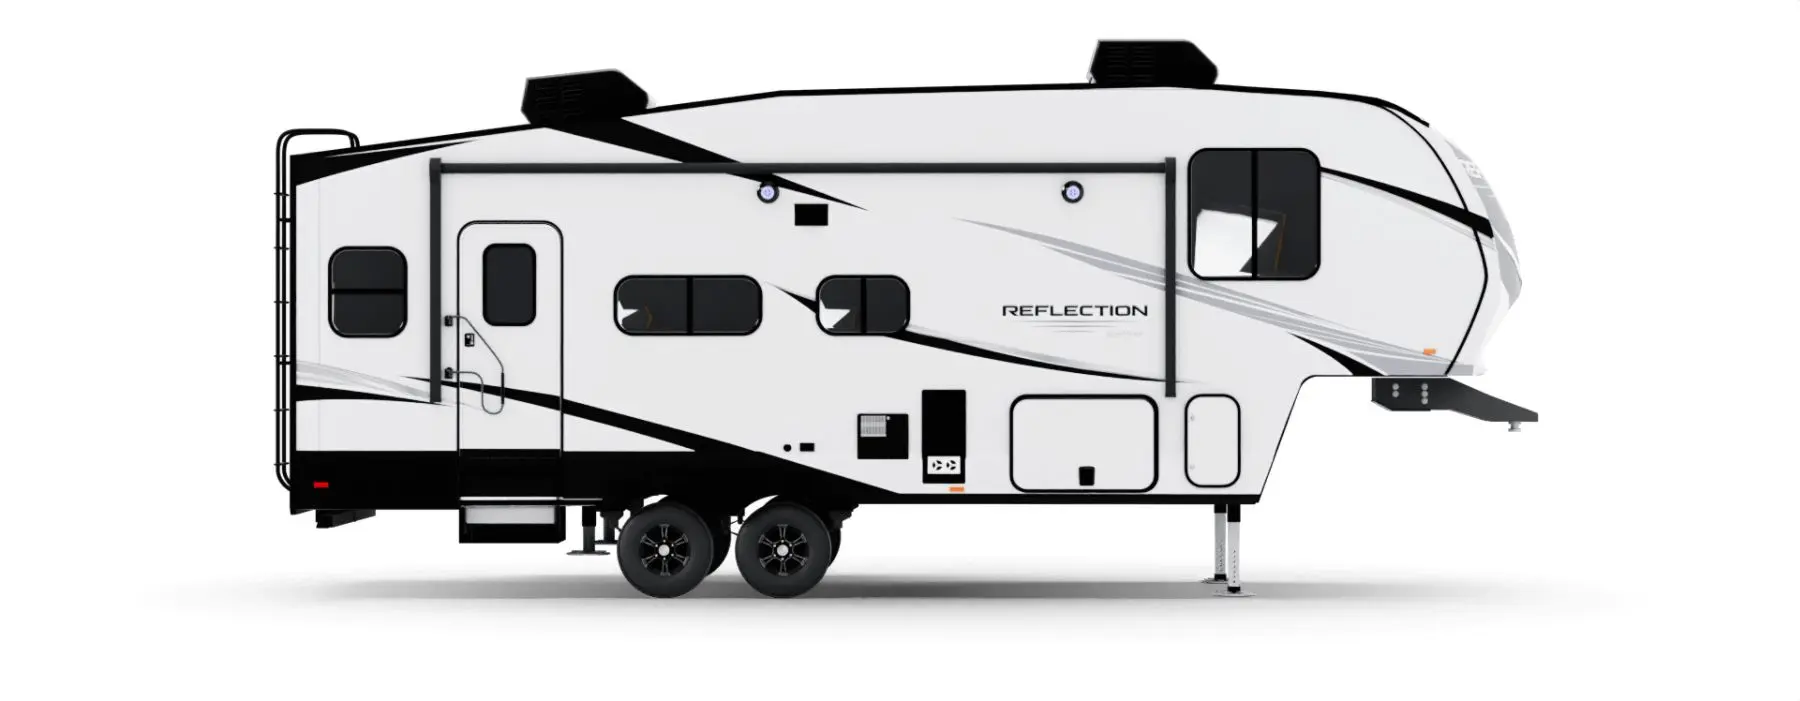 Reflection 150 Series Fifth Wheel